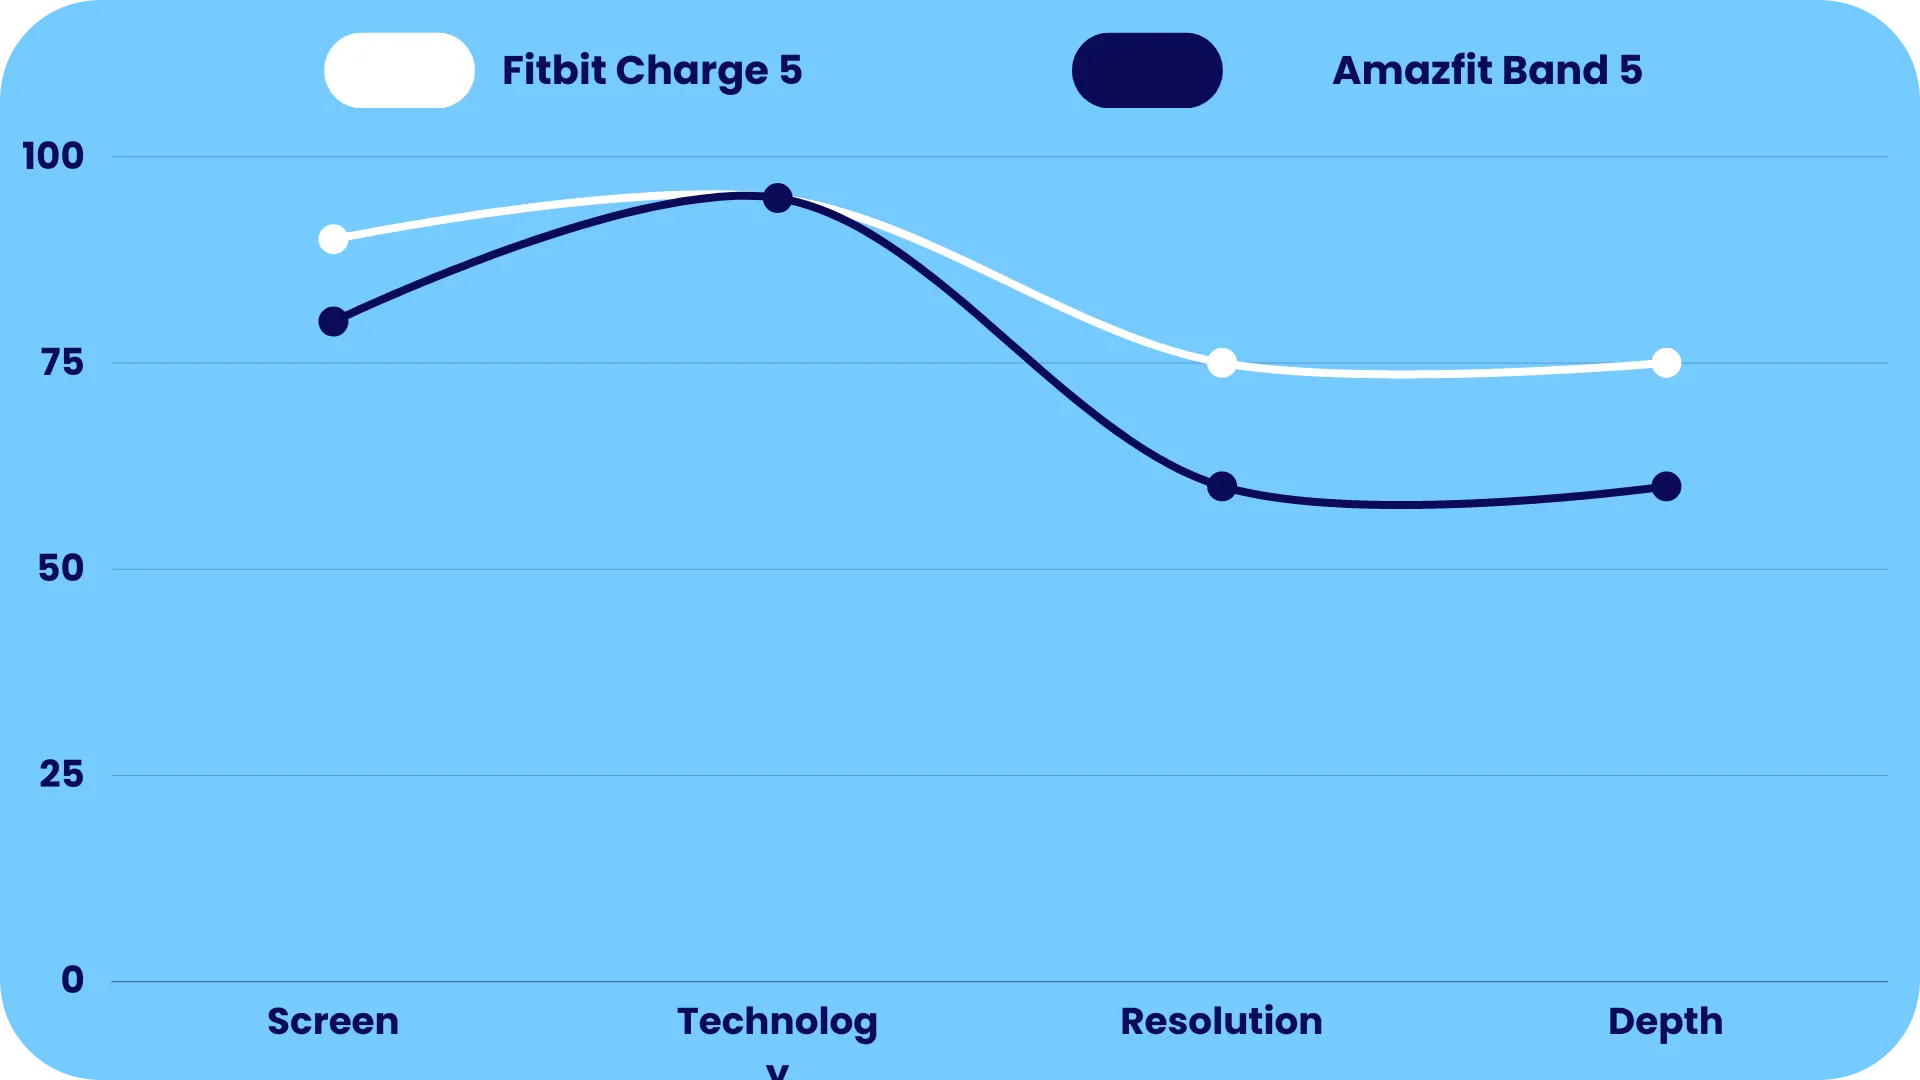 Display Comparison of Fitbit Charge 5 & Amazfit Band 5